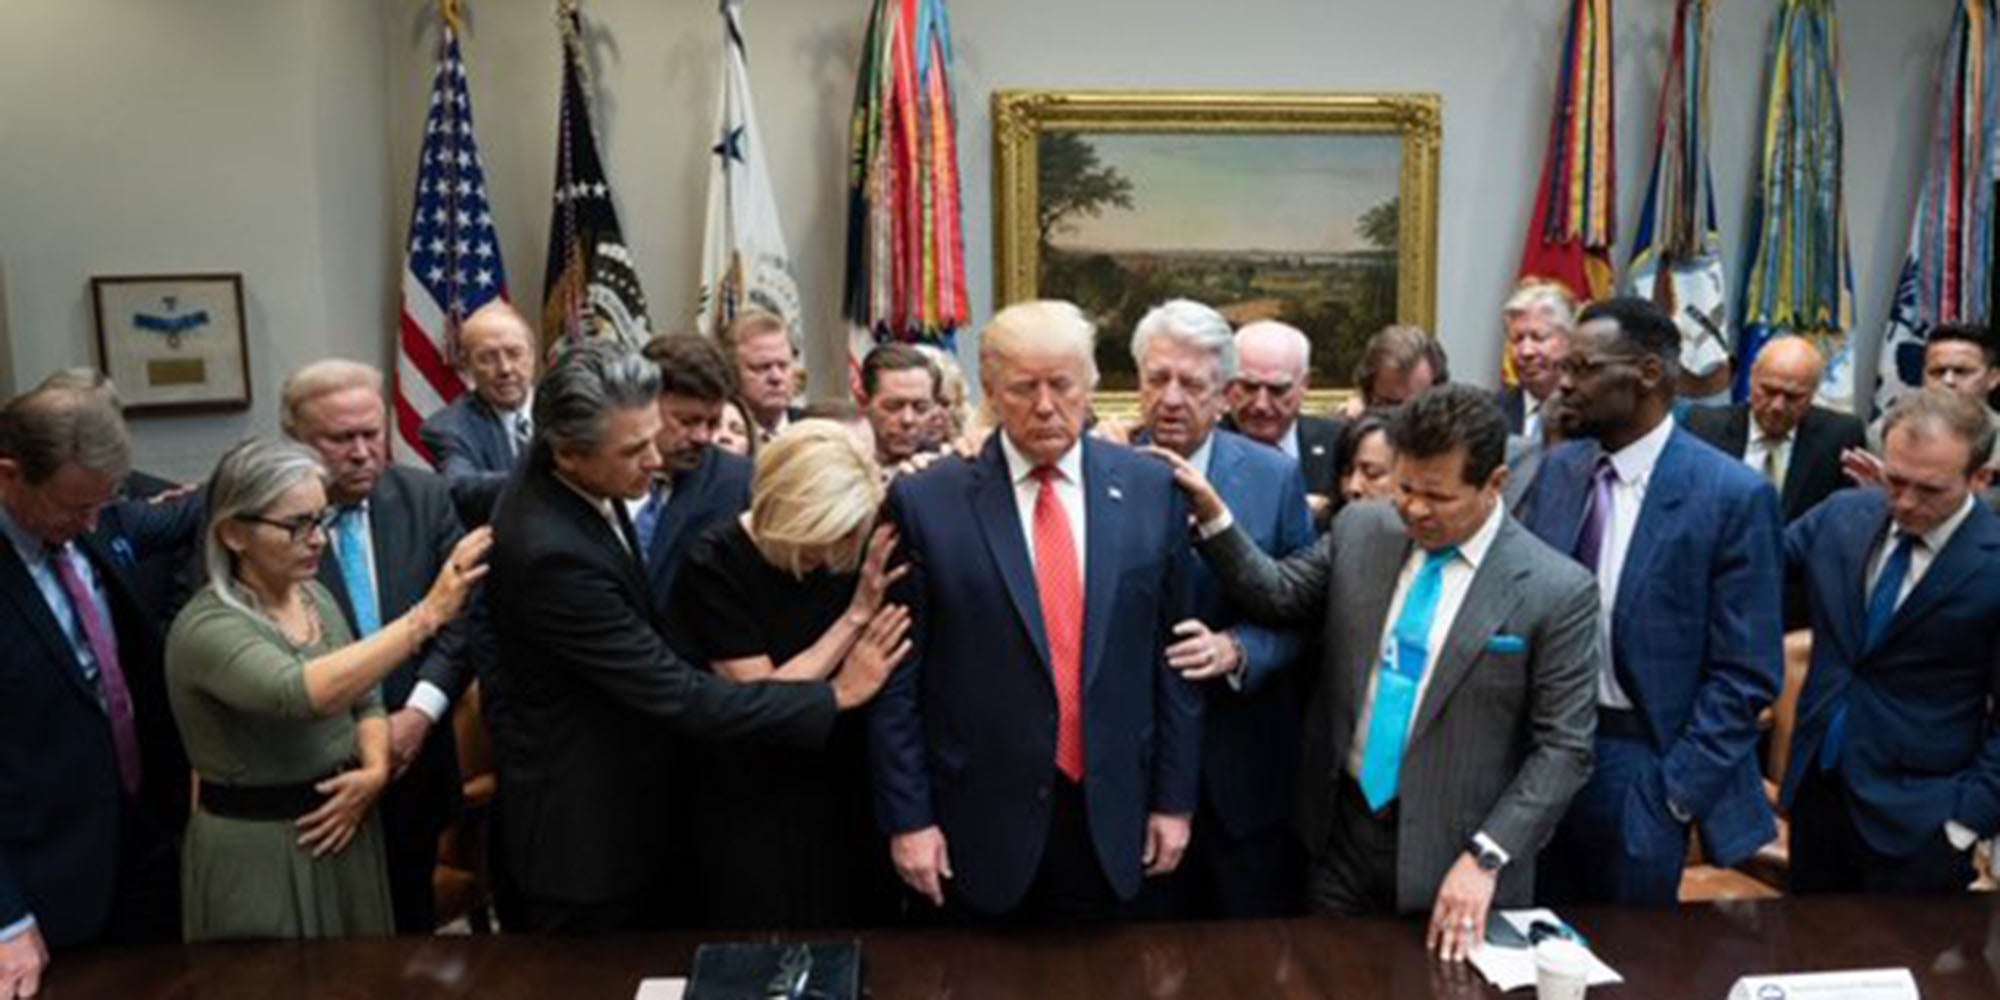 Trump prayer photo with faith leaders has become an instant meme | indy100